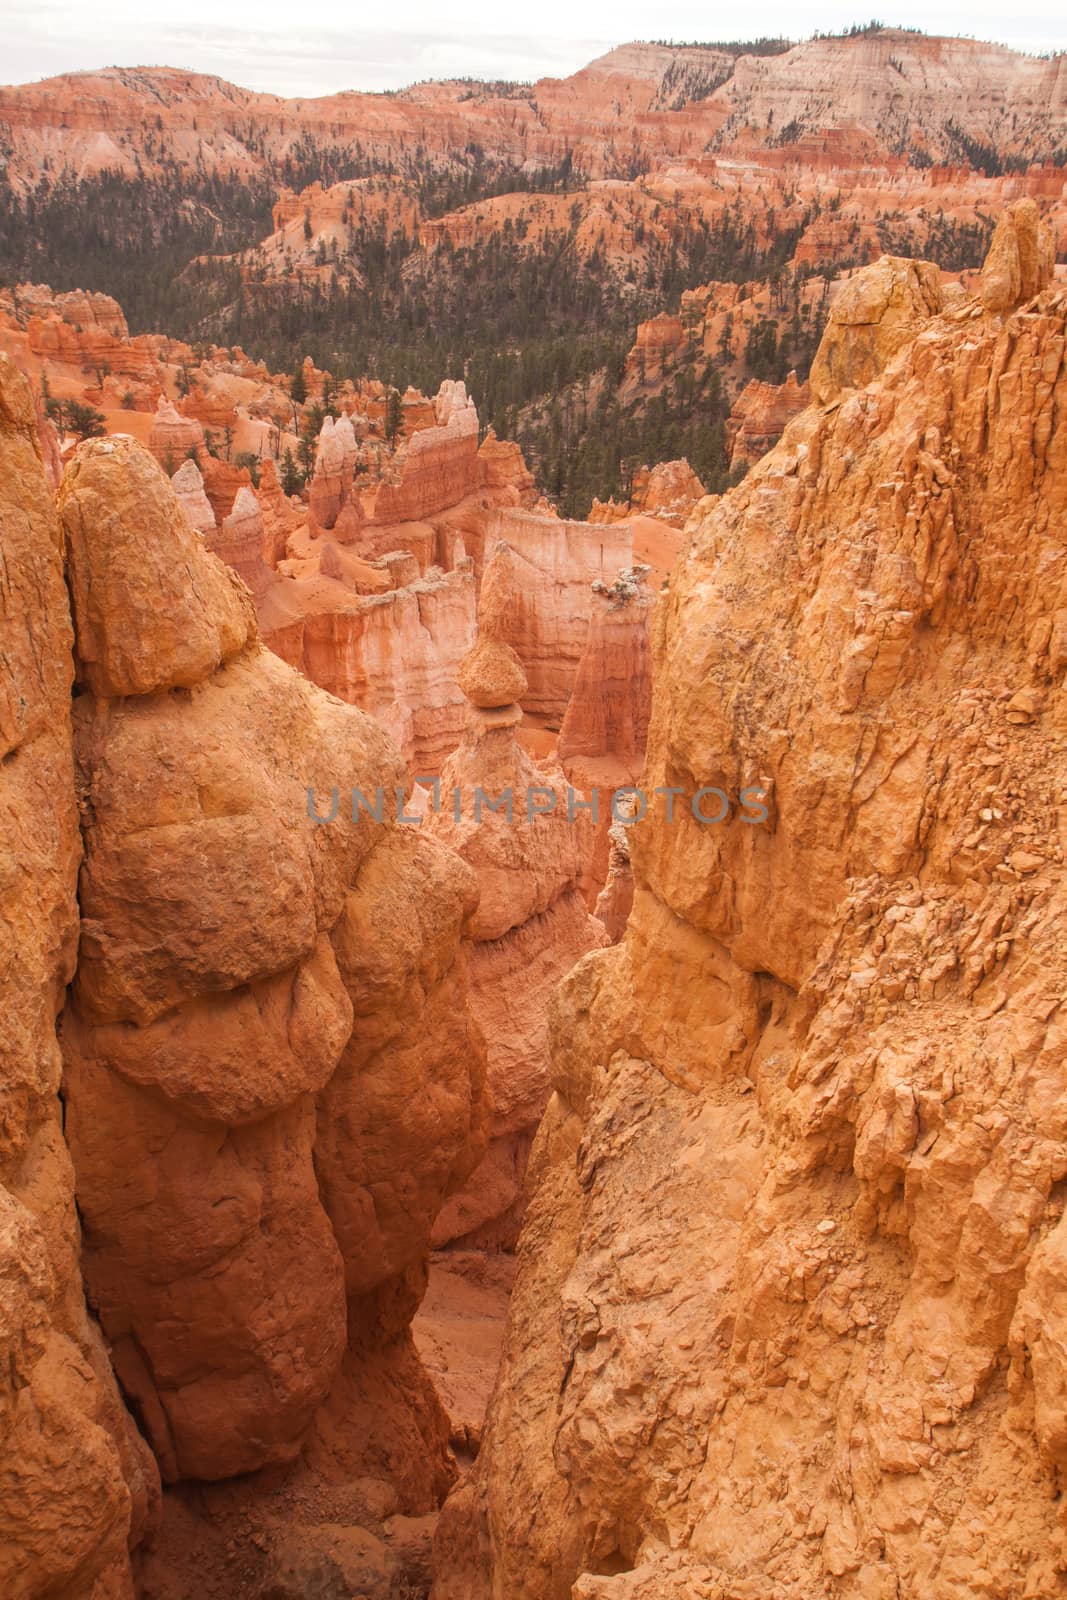 View over Bryce Canyon National Park. Utah.